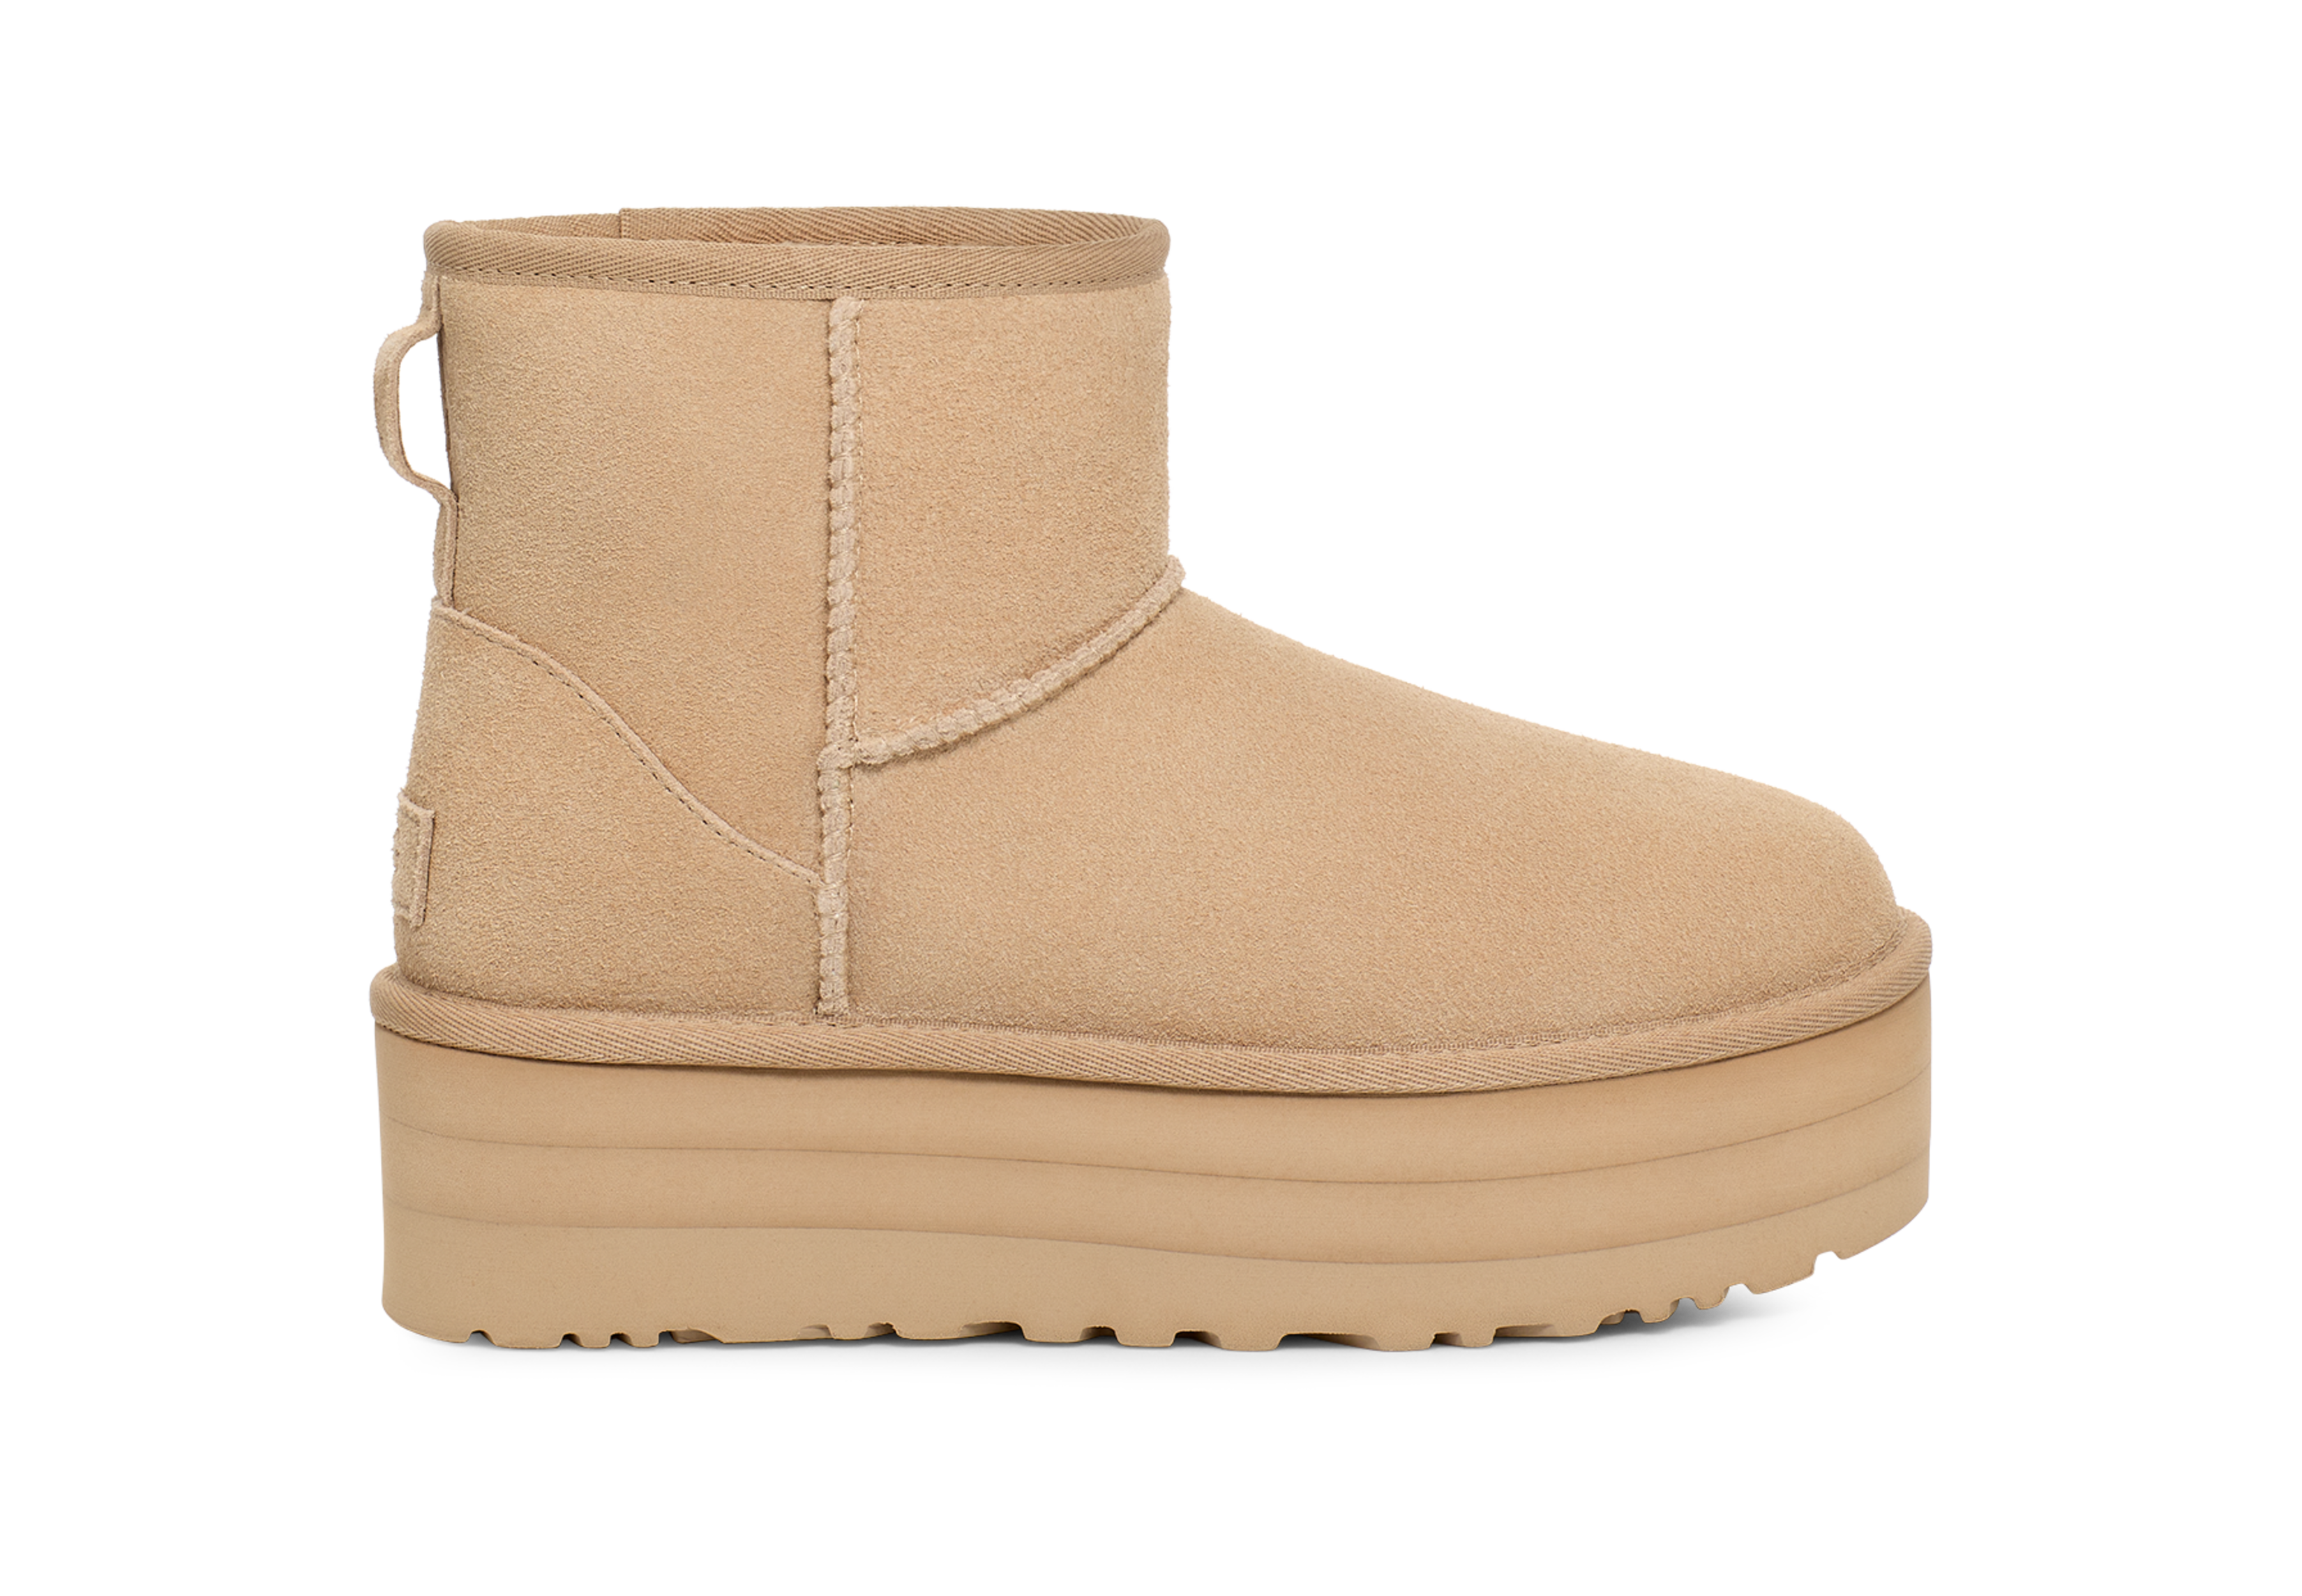 UGG Boots for the Holidays, Just A Tina Bit